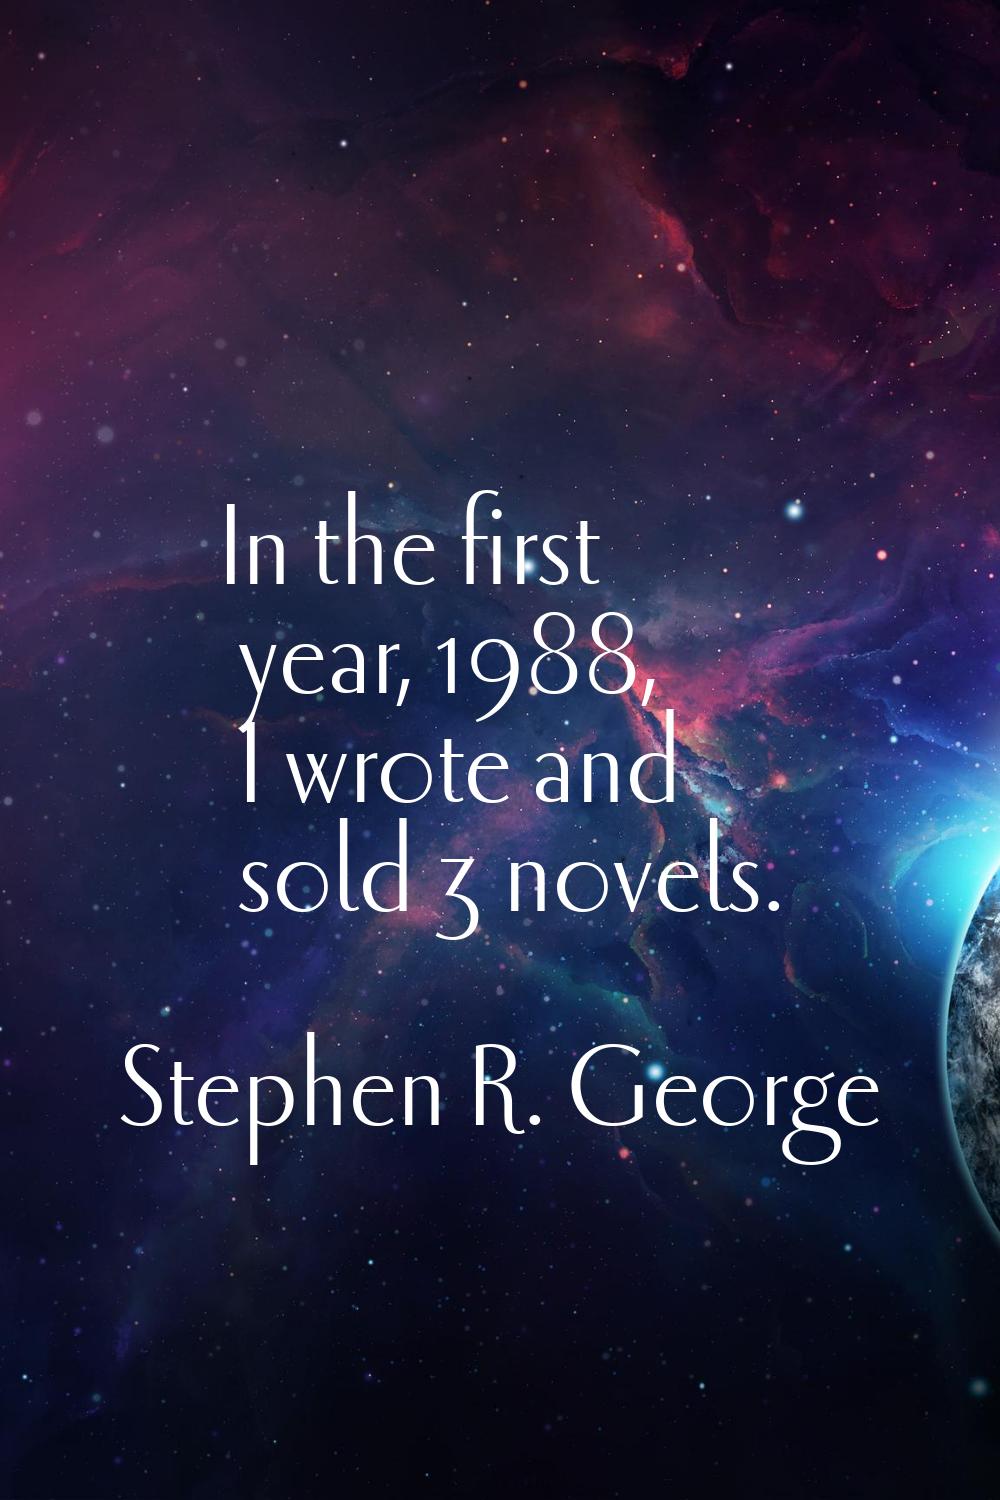 In the first year, 1988, I wrote and sold 3 novels.